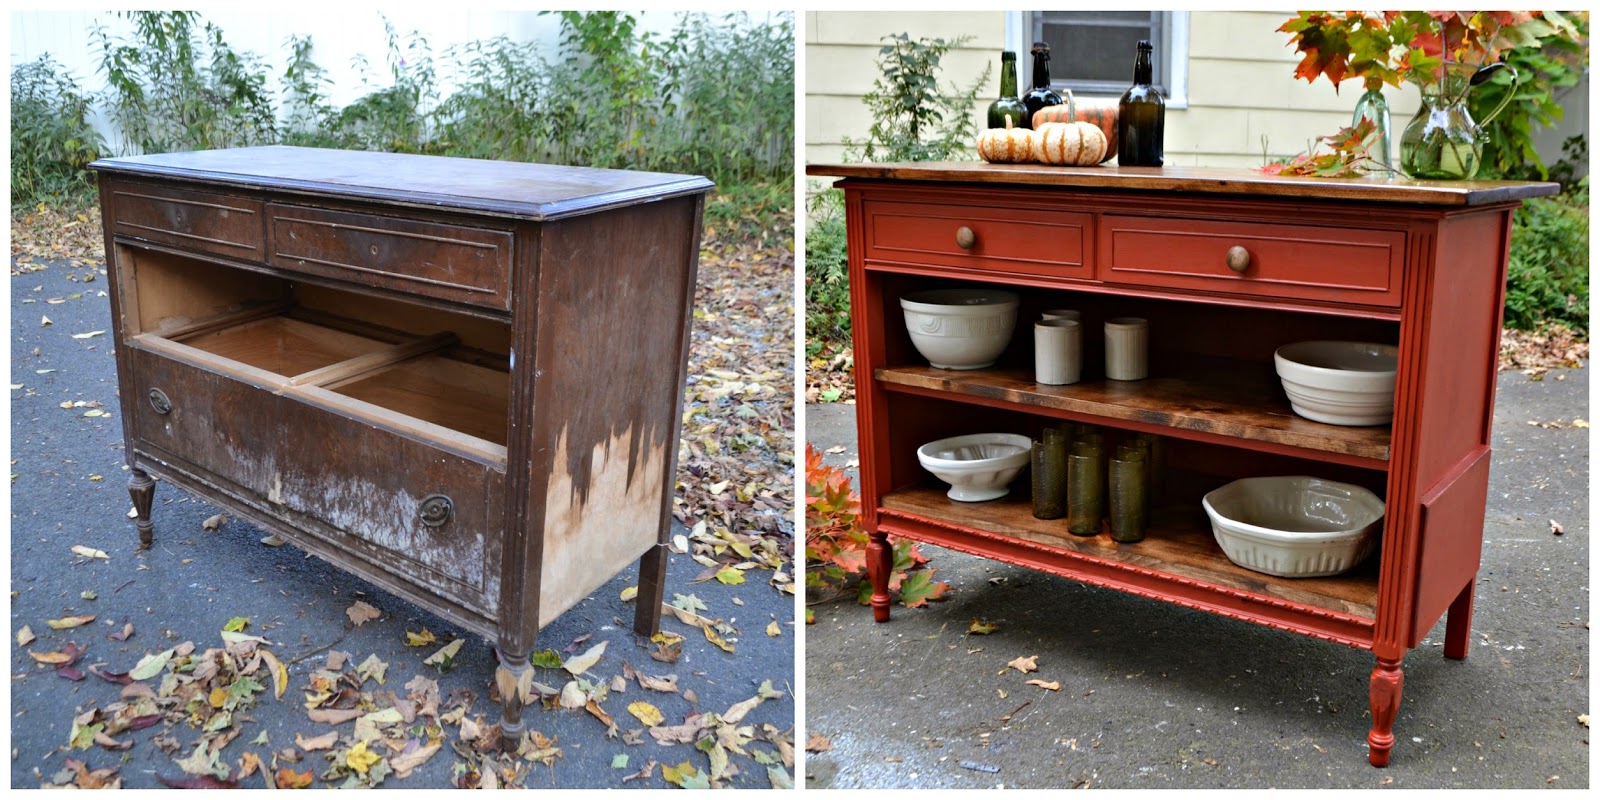 Upcycle An Old Dresser Into A Kitchen Island For Budget Beauty